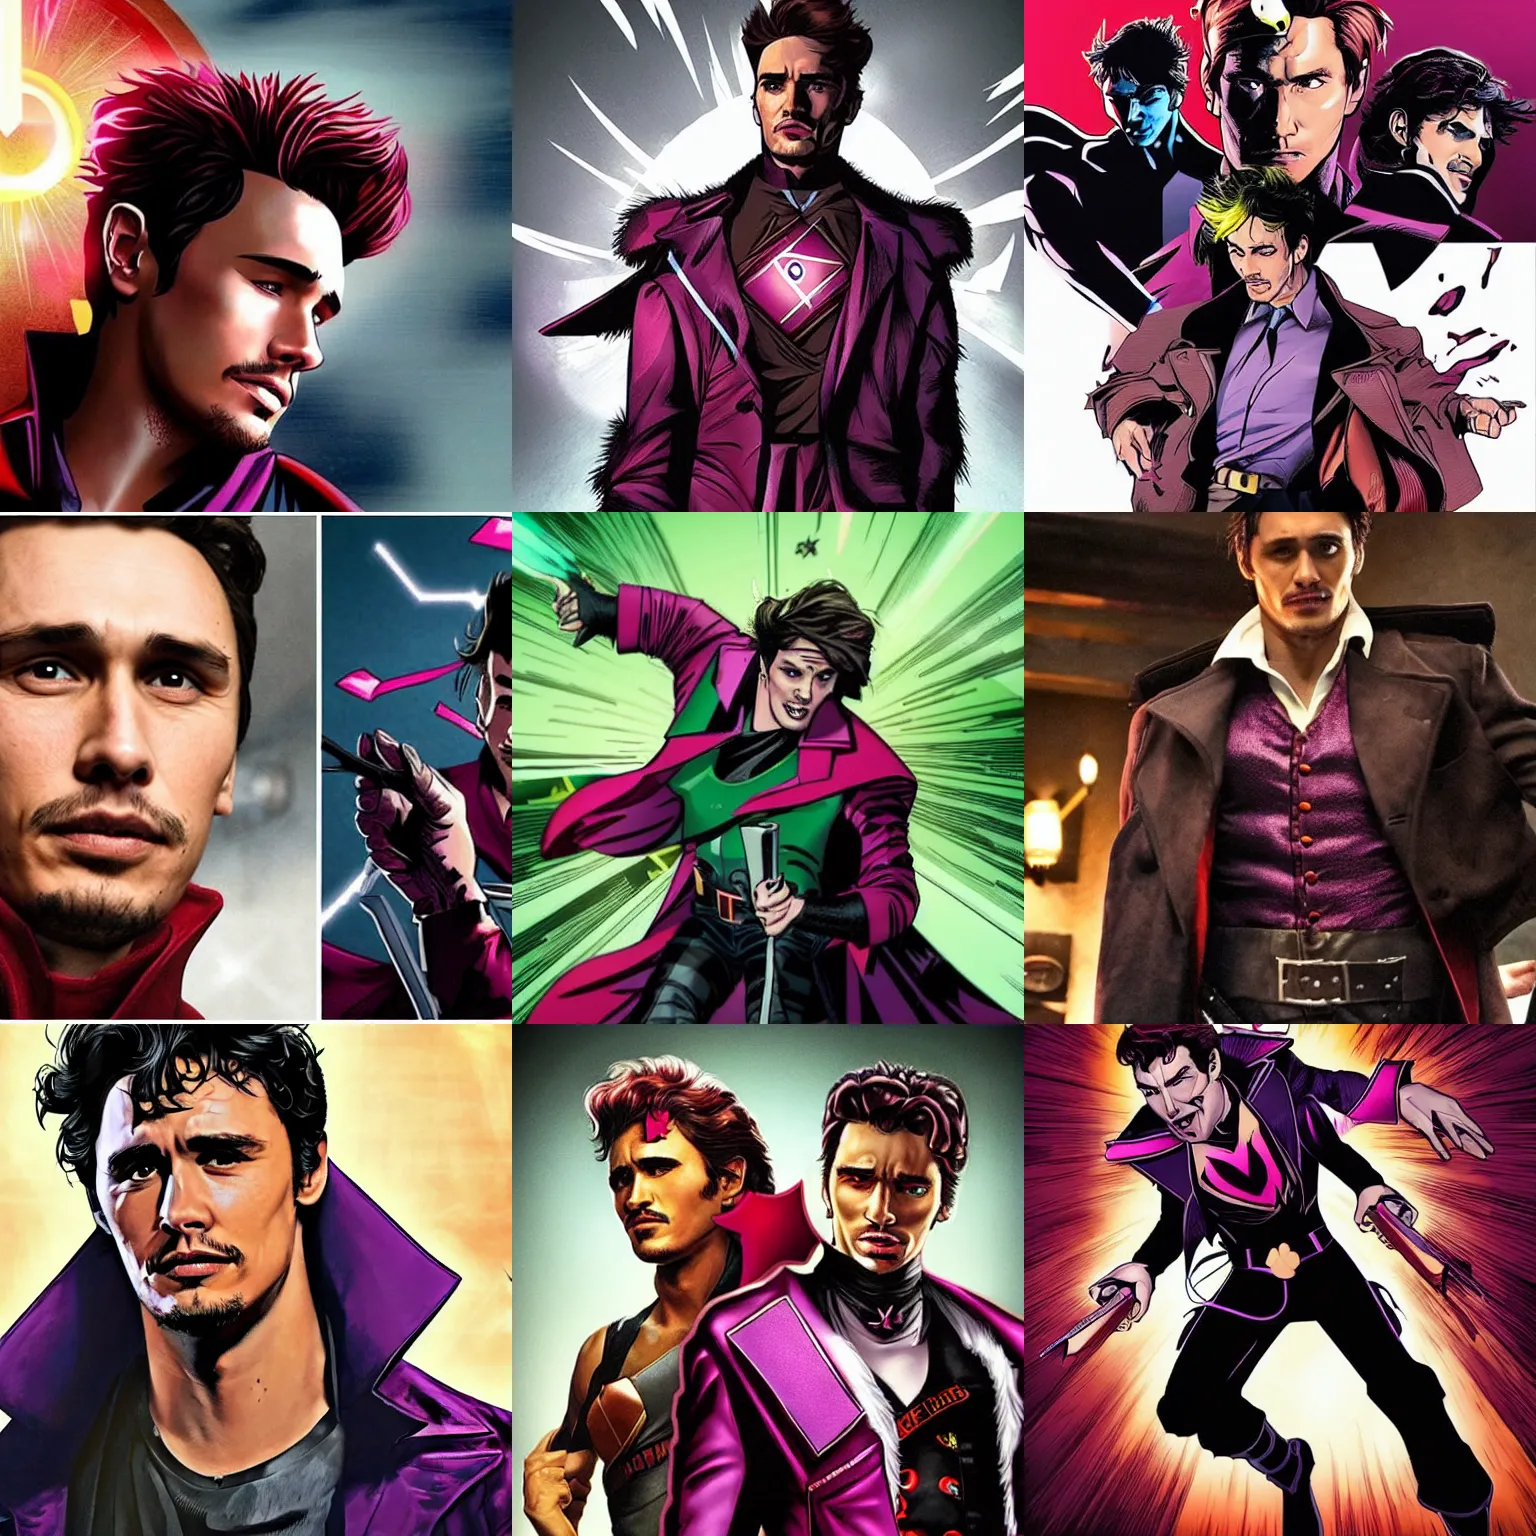 Prompt: James Franco as Gambit